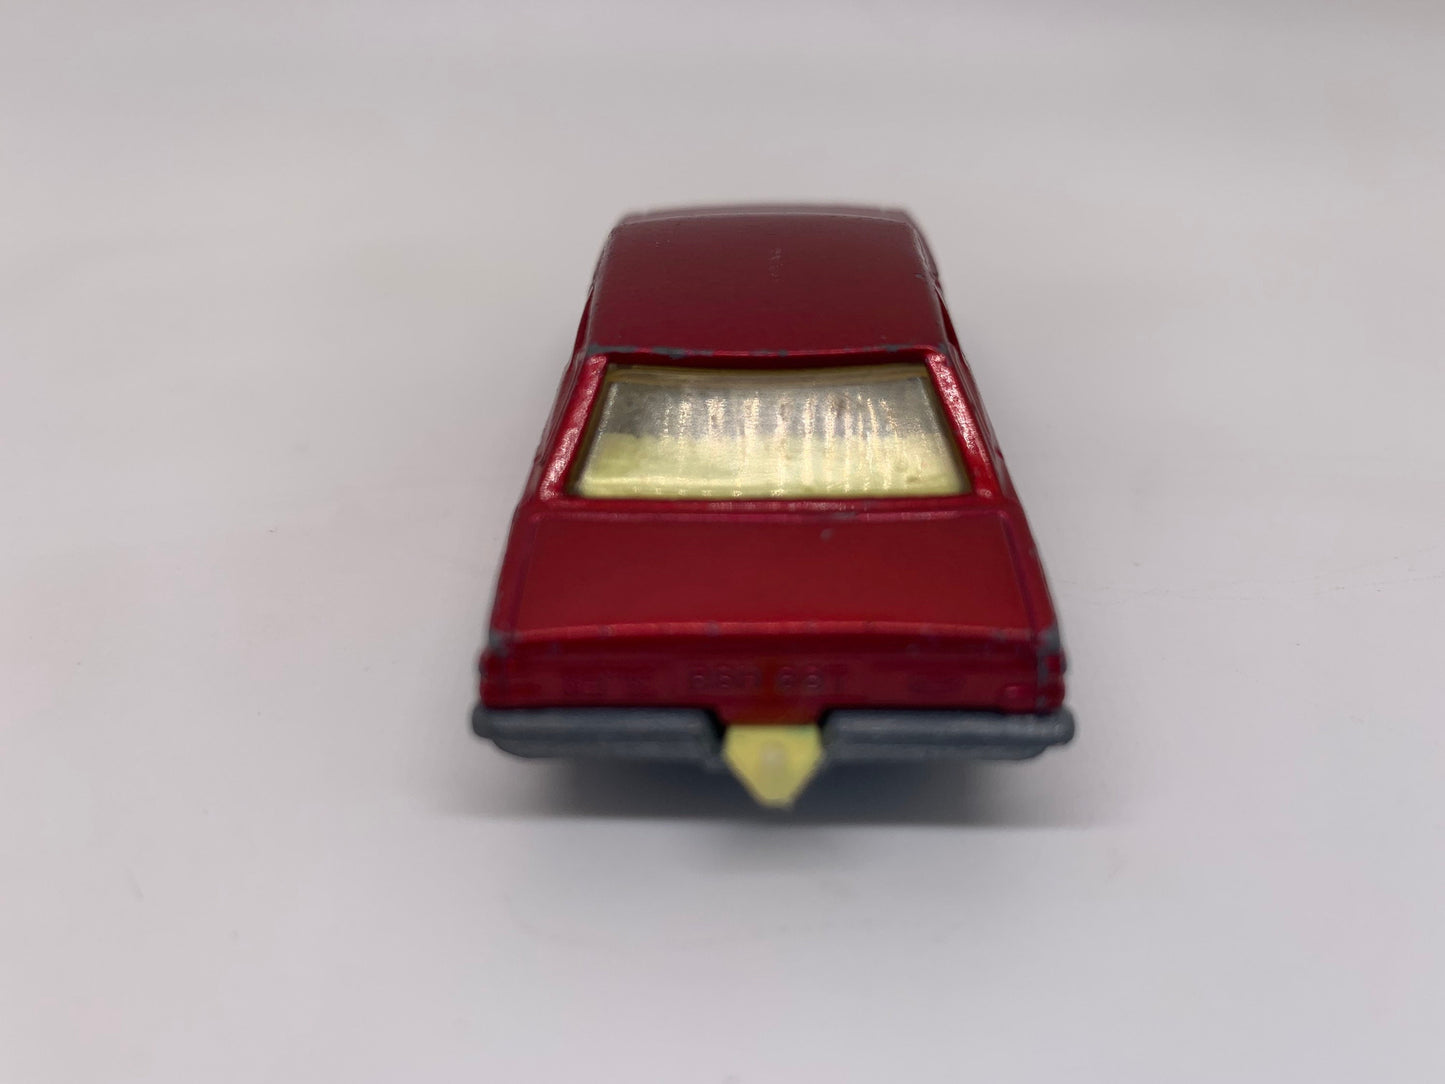 Matchbox Ford Cortina Mark IV Metallic Dark Red Collectable Scale Model Miniature Toy Car Perfect Birthday Gift